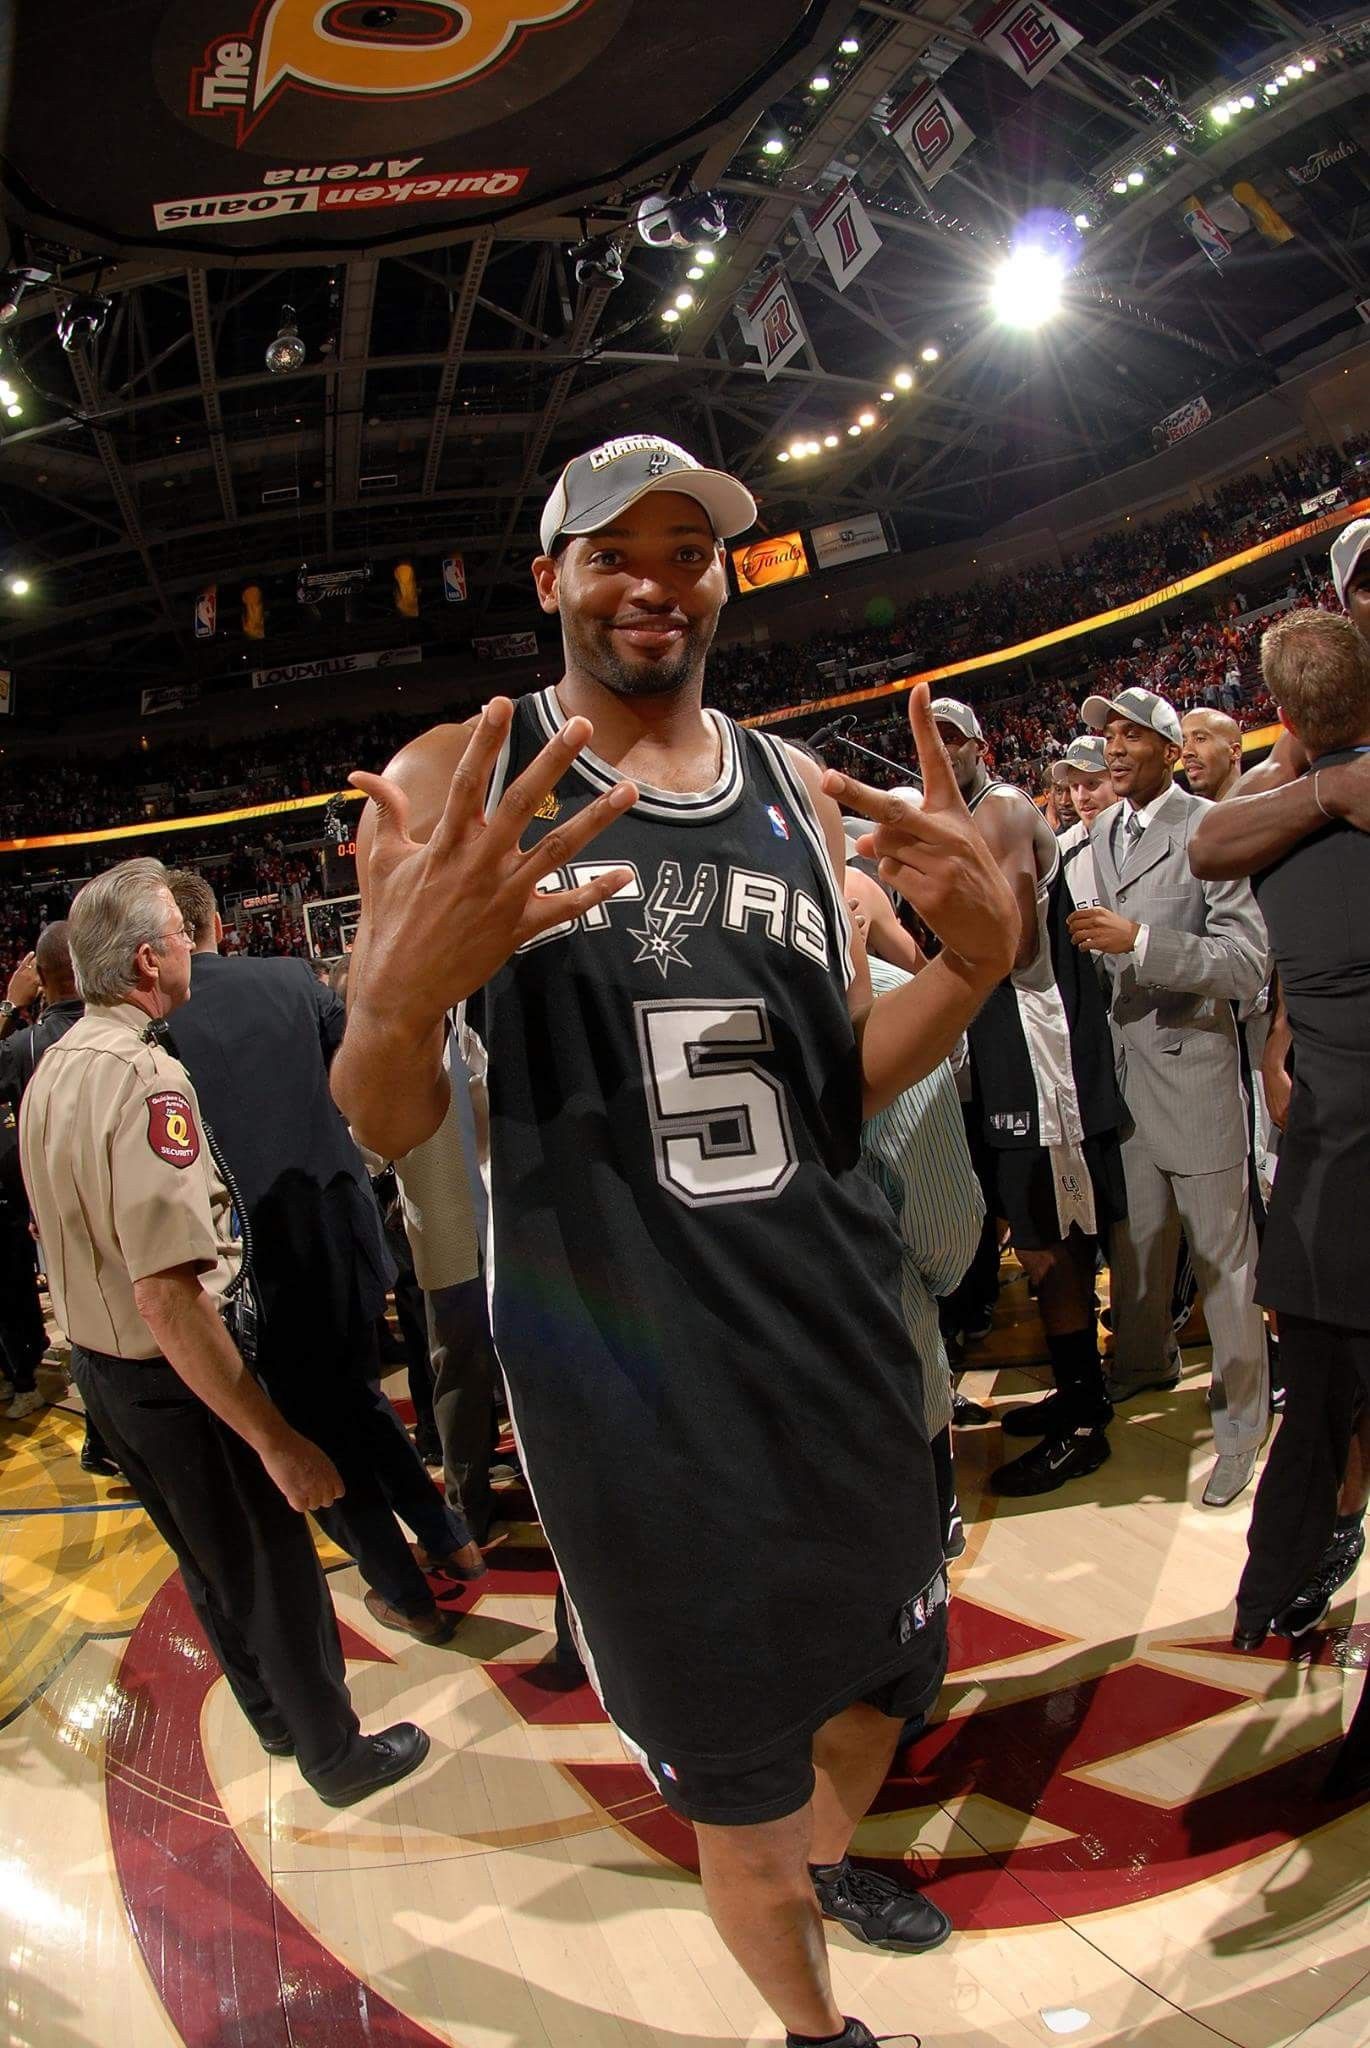 rings Robert Horry. Robert horry, Nba, Back to the future